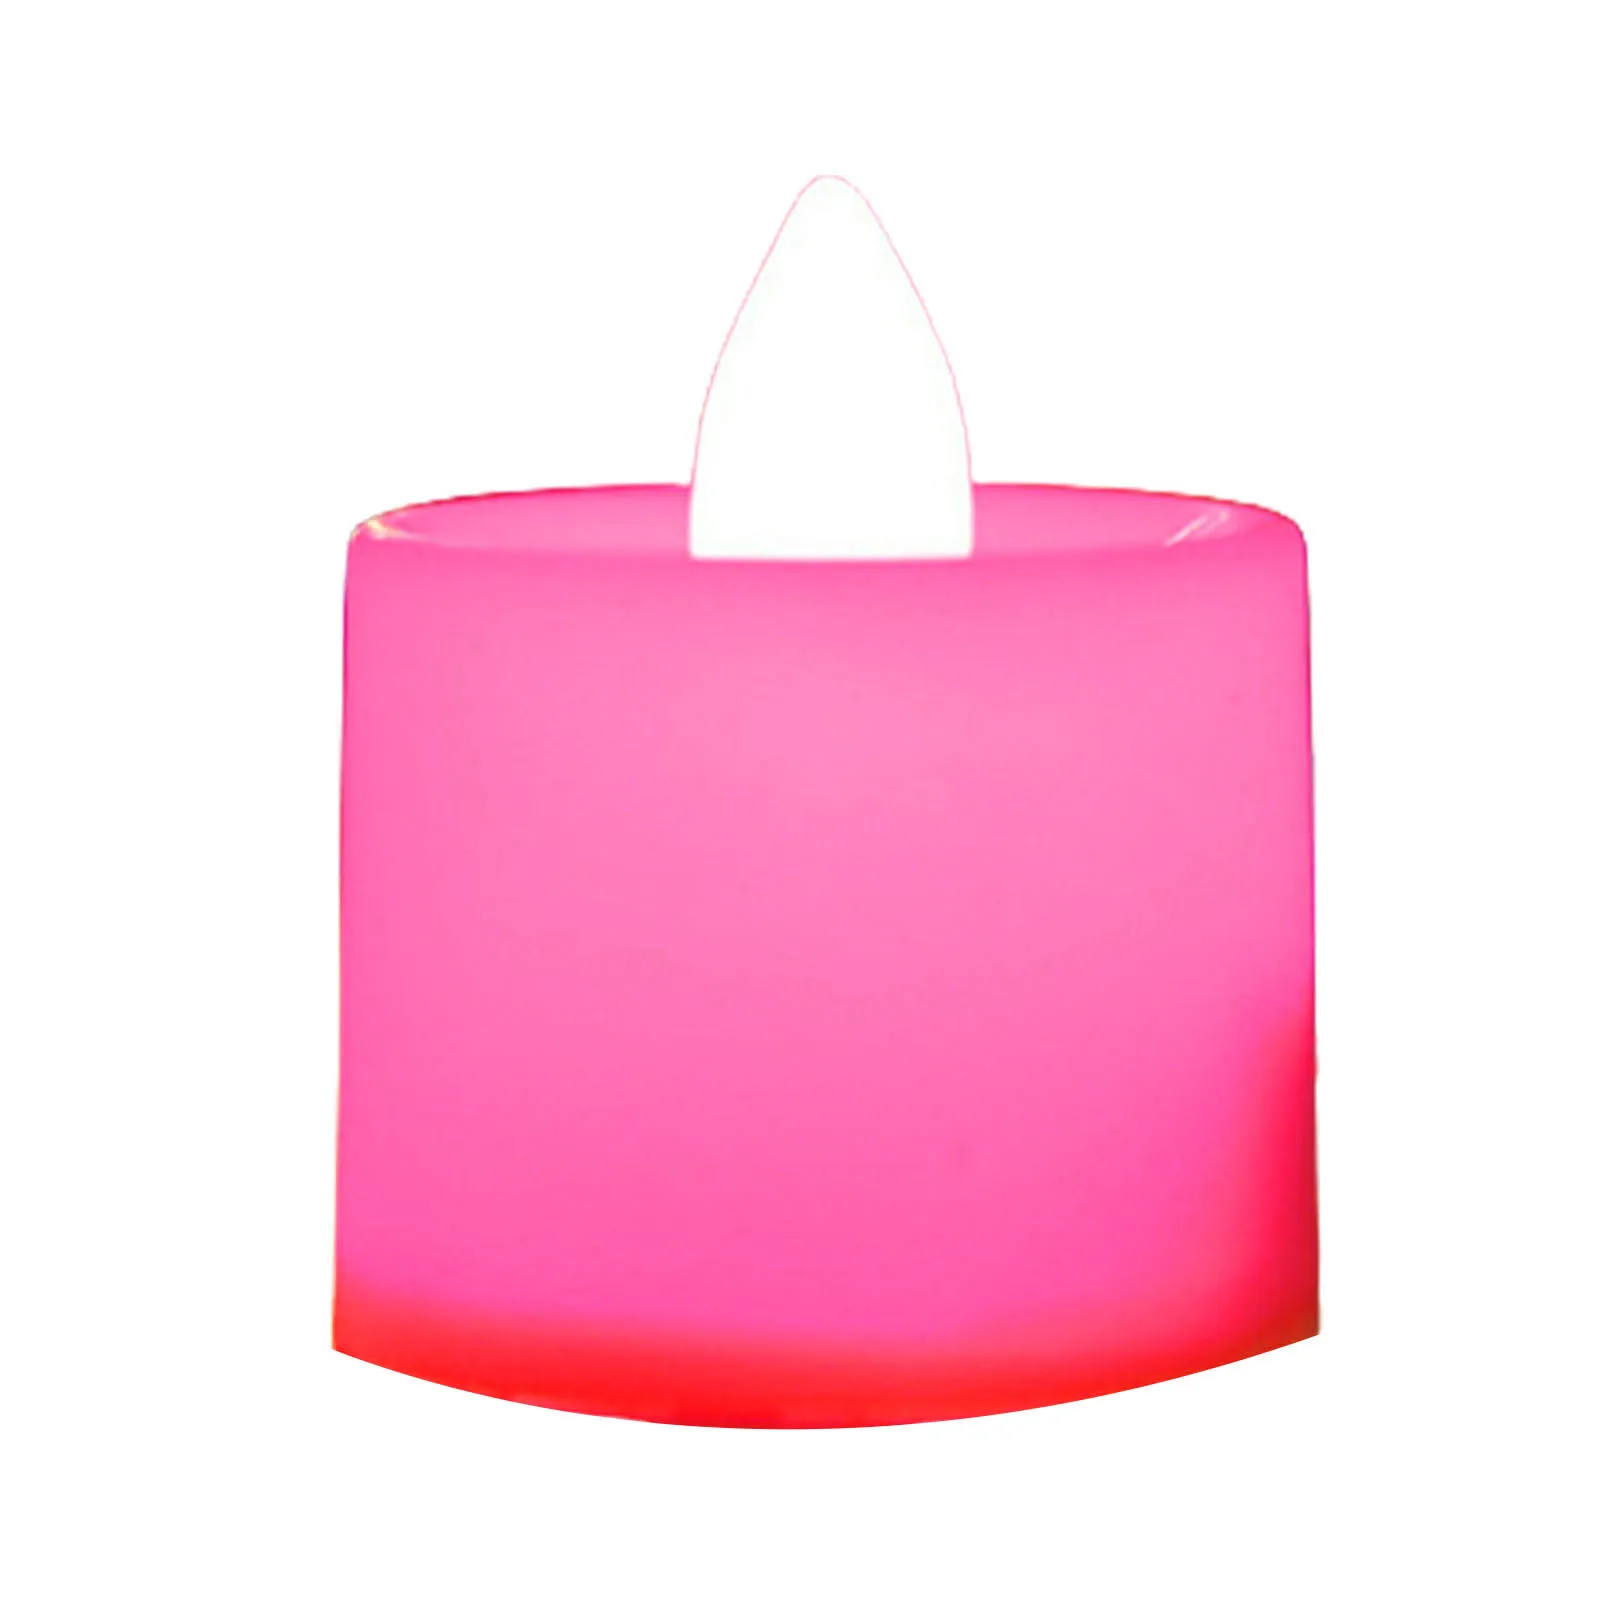 

LED Flameless Candle Lights Smokeless Waxless Safe to Use Tealight Candles for Garden Restaurant Hotel Decor THJ99